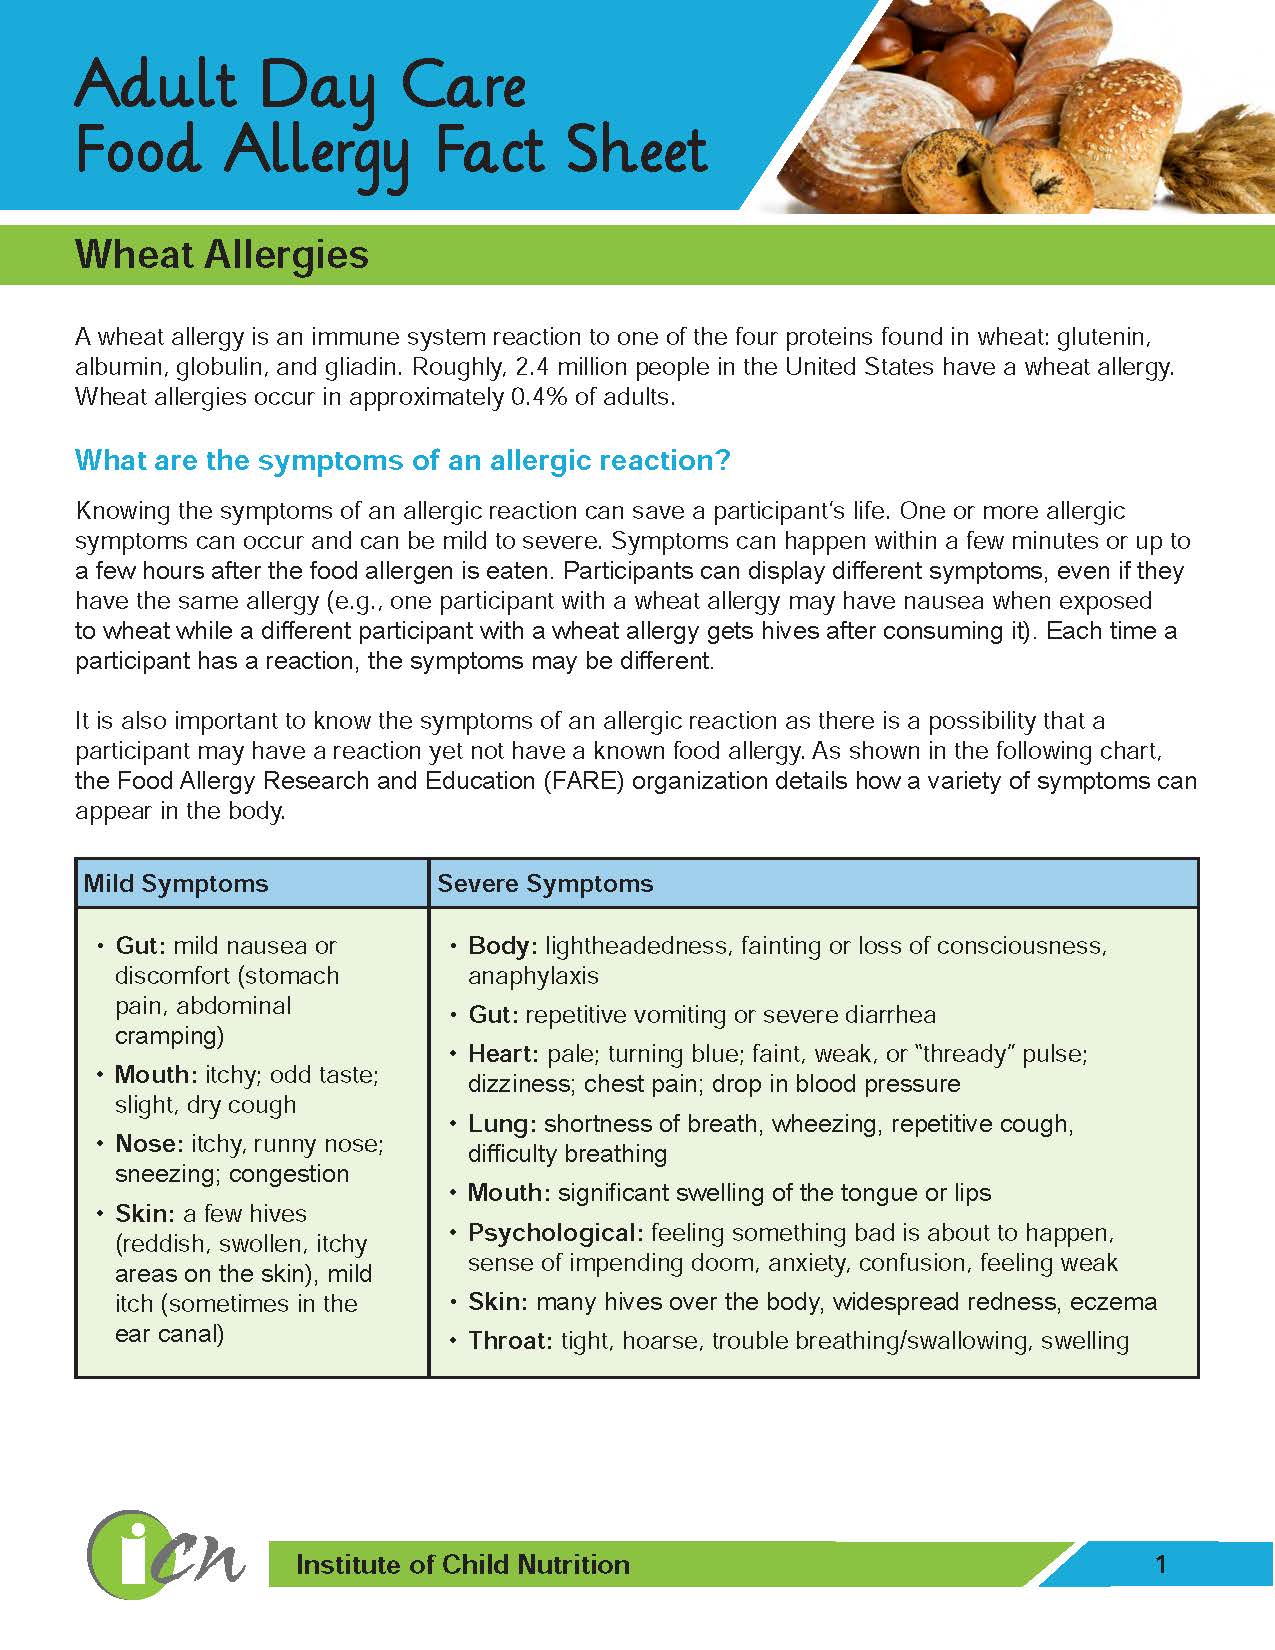 Adult Day Care Food Allergen Fact Sheets